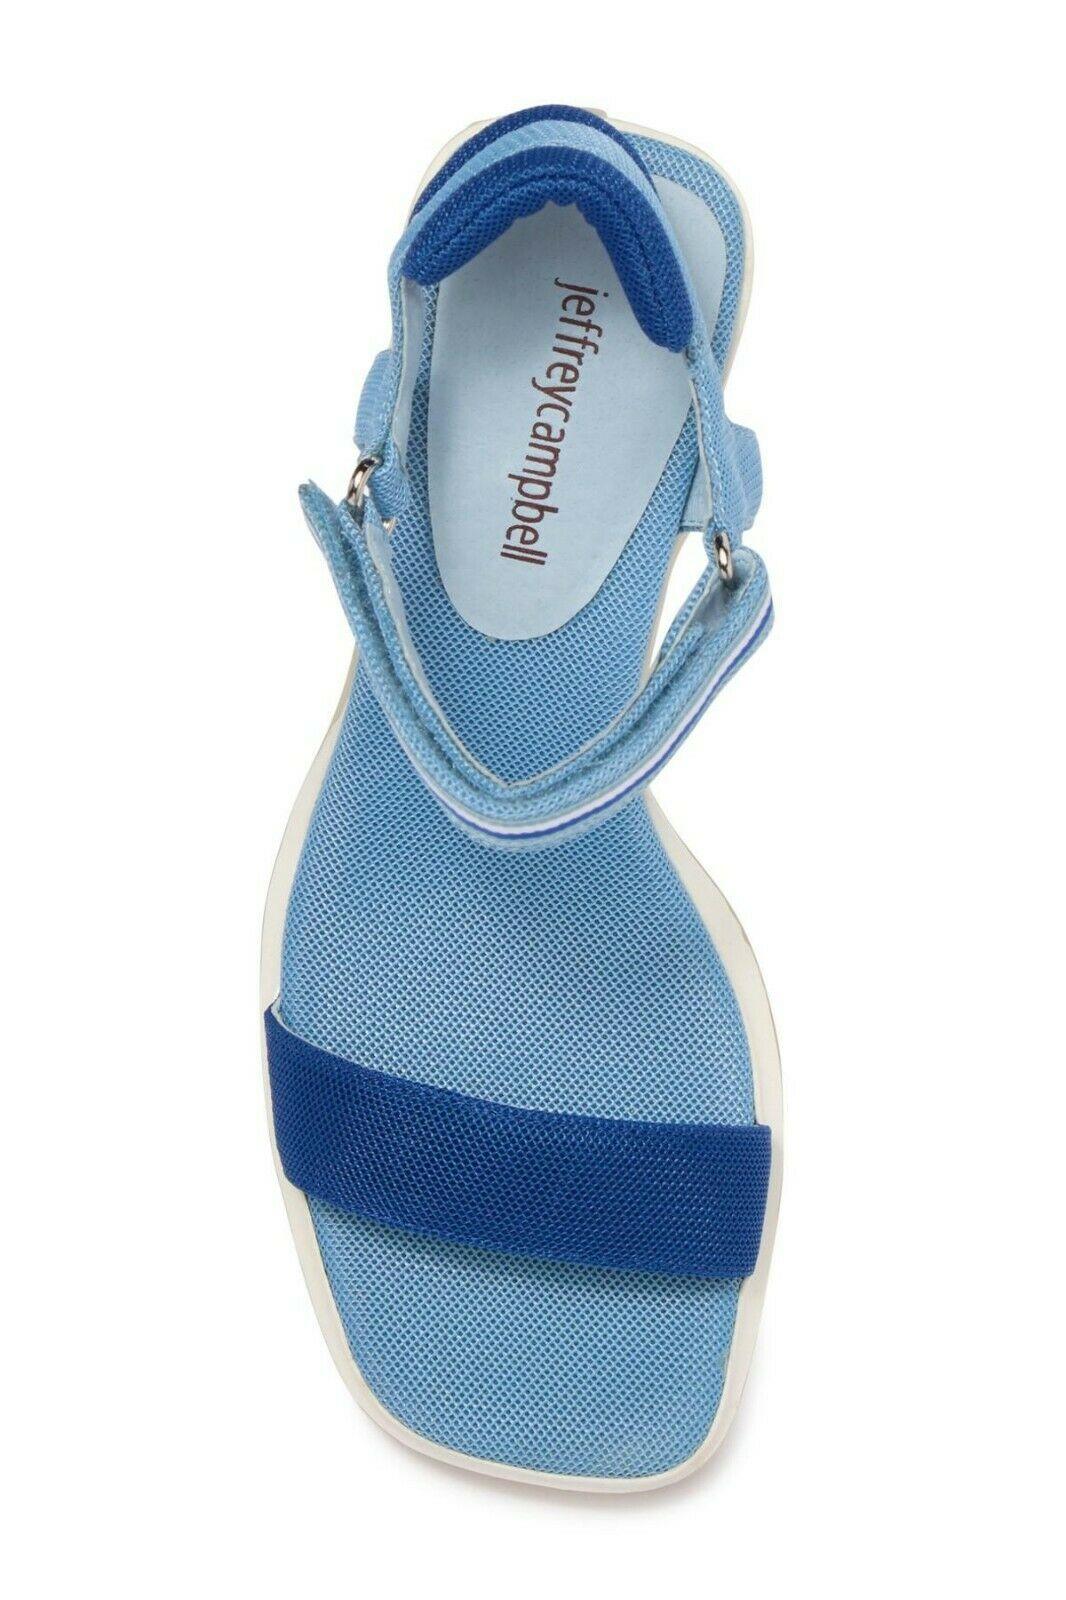 Jeffrey Campbell Fumble Ankle Strap Sandals Blue Mesh Combo Size US 9.5 - SVNYFancy